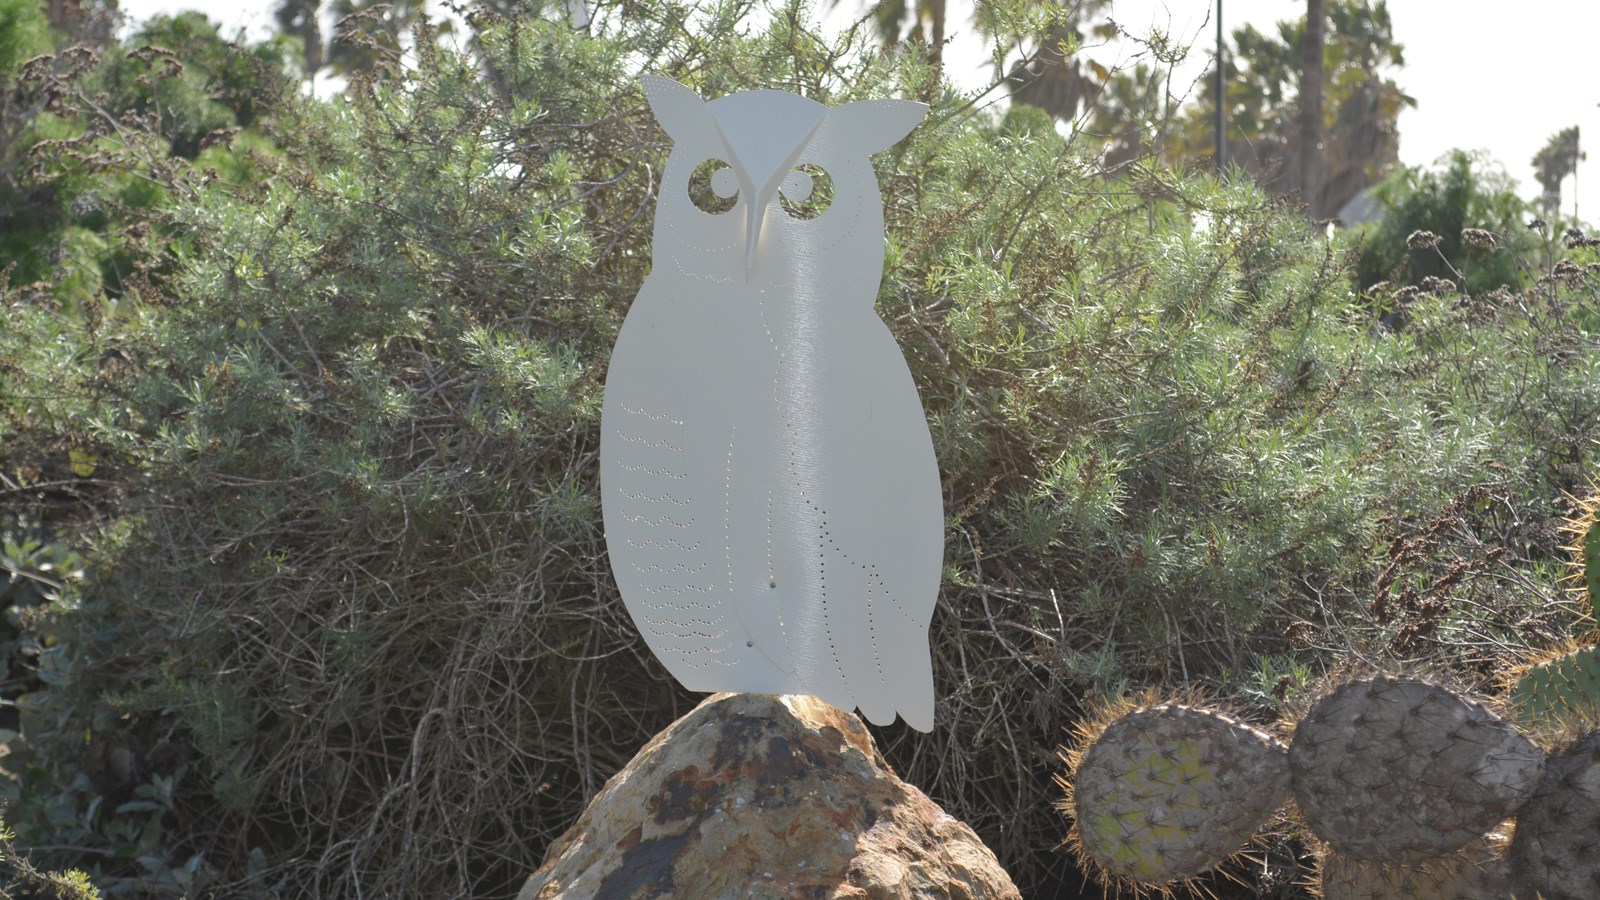 A two-foot-tall long eared owl sits atop a large pointed rock. Hole punch line designs outline the b